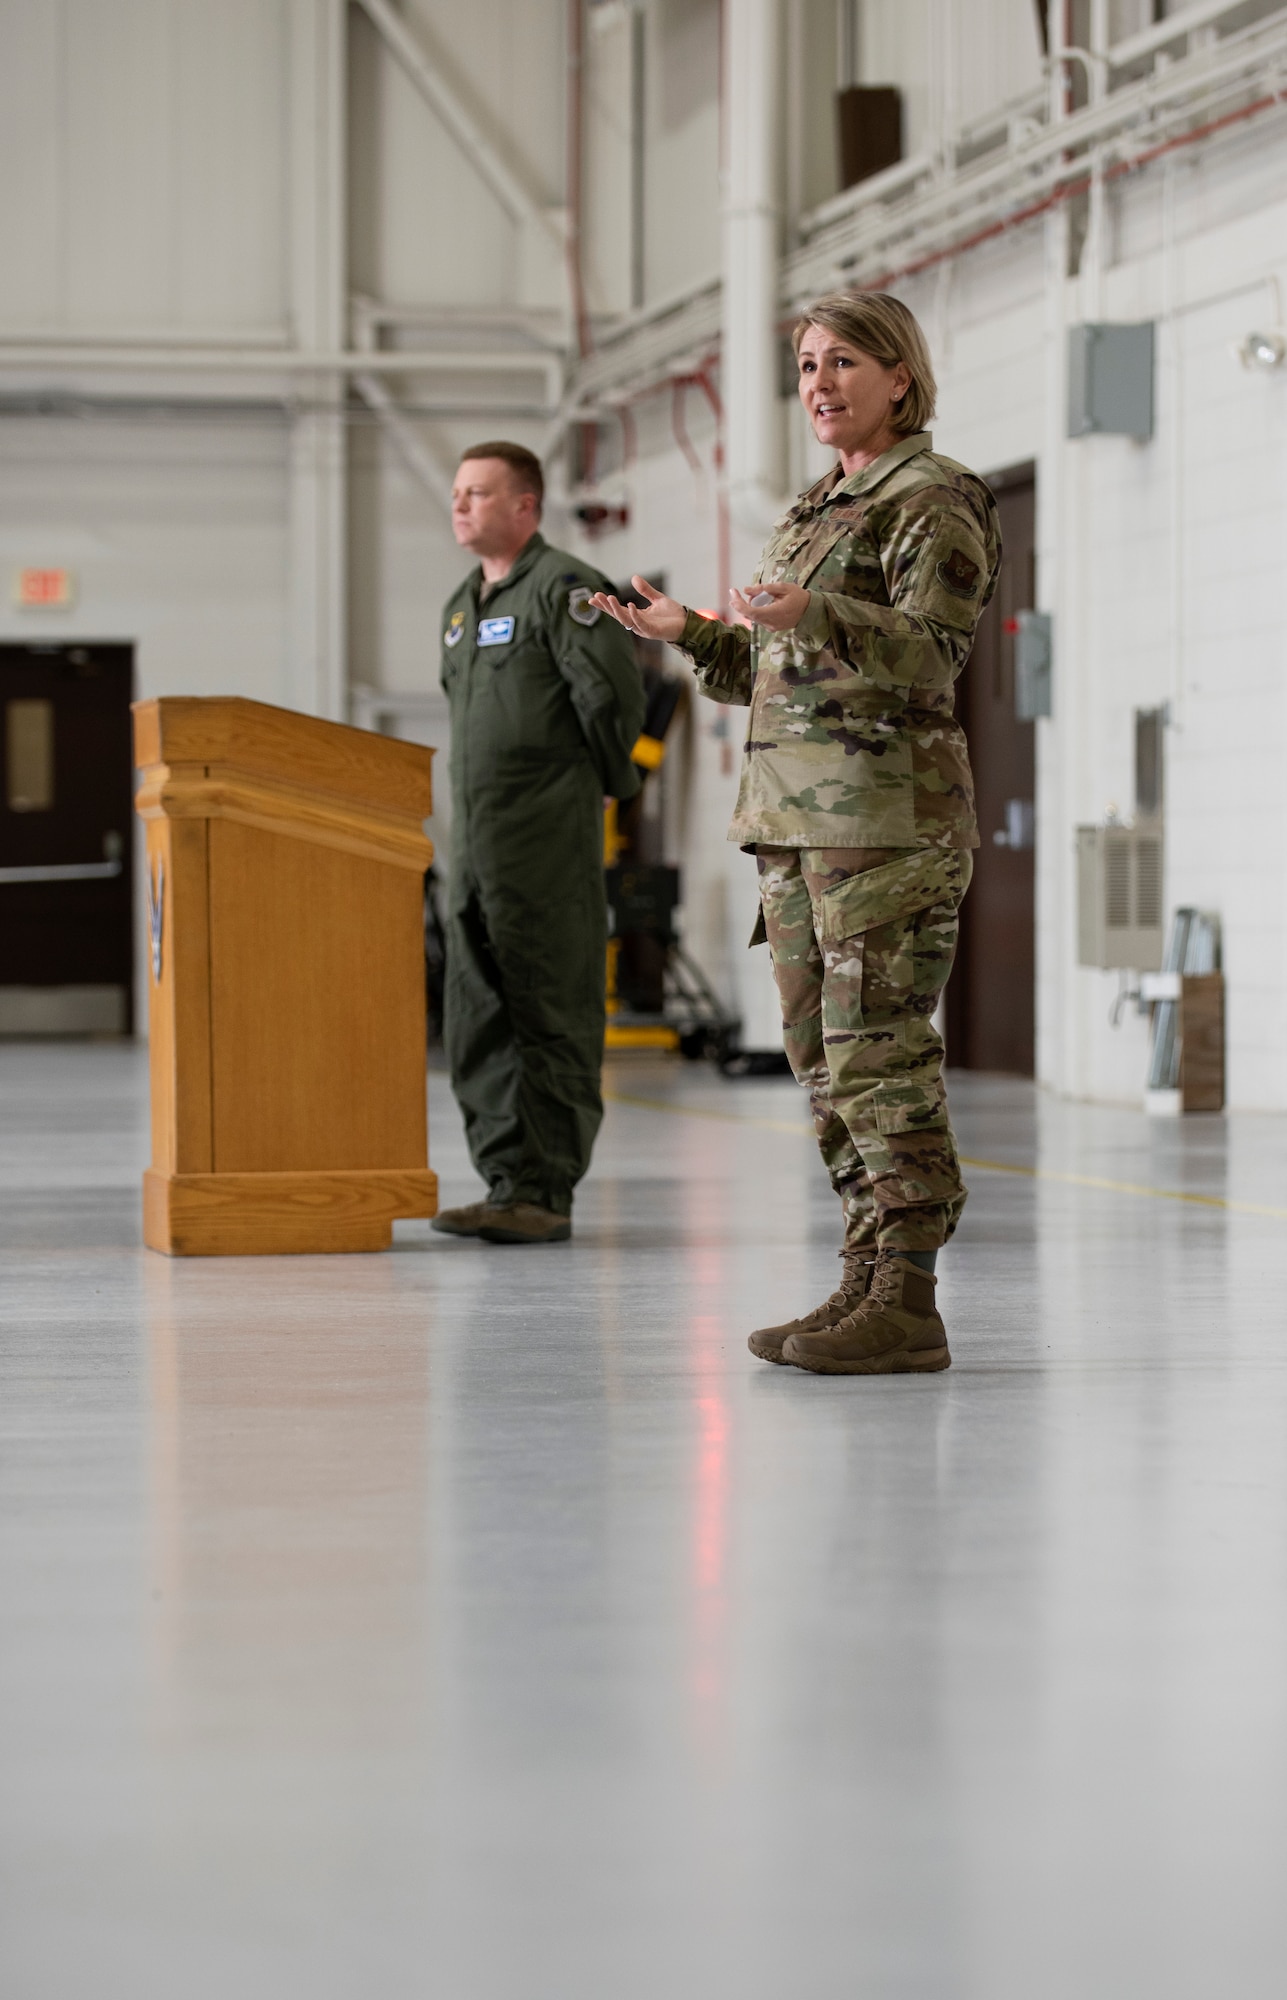 Chief Master Sgt. Kathleen McCool, 509th Bomb Wing command chief, introduced herself to an audience during a commander's call assembly on May 23, 2019, at Whiteman Air Force Base, Missouri. McCool and Col. Jeffrey Schreiner, the 509th BW commander, took the opportunity to emphasize the importance of Airman wellness. (U.S. Air Force photo by Staff Sgt. Kayla White)